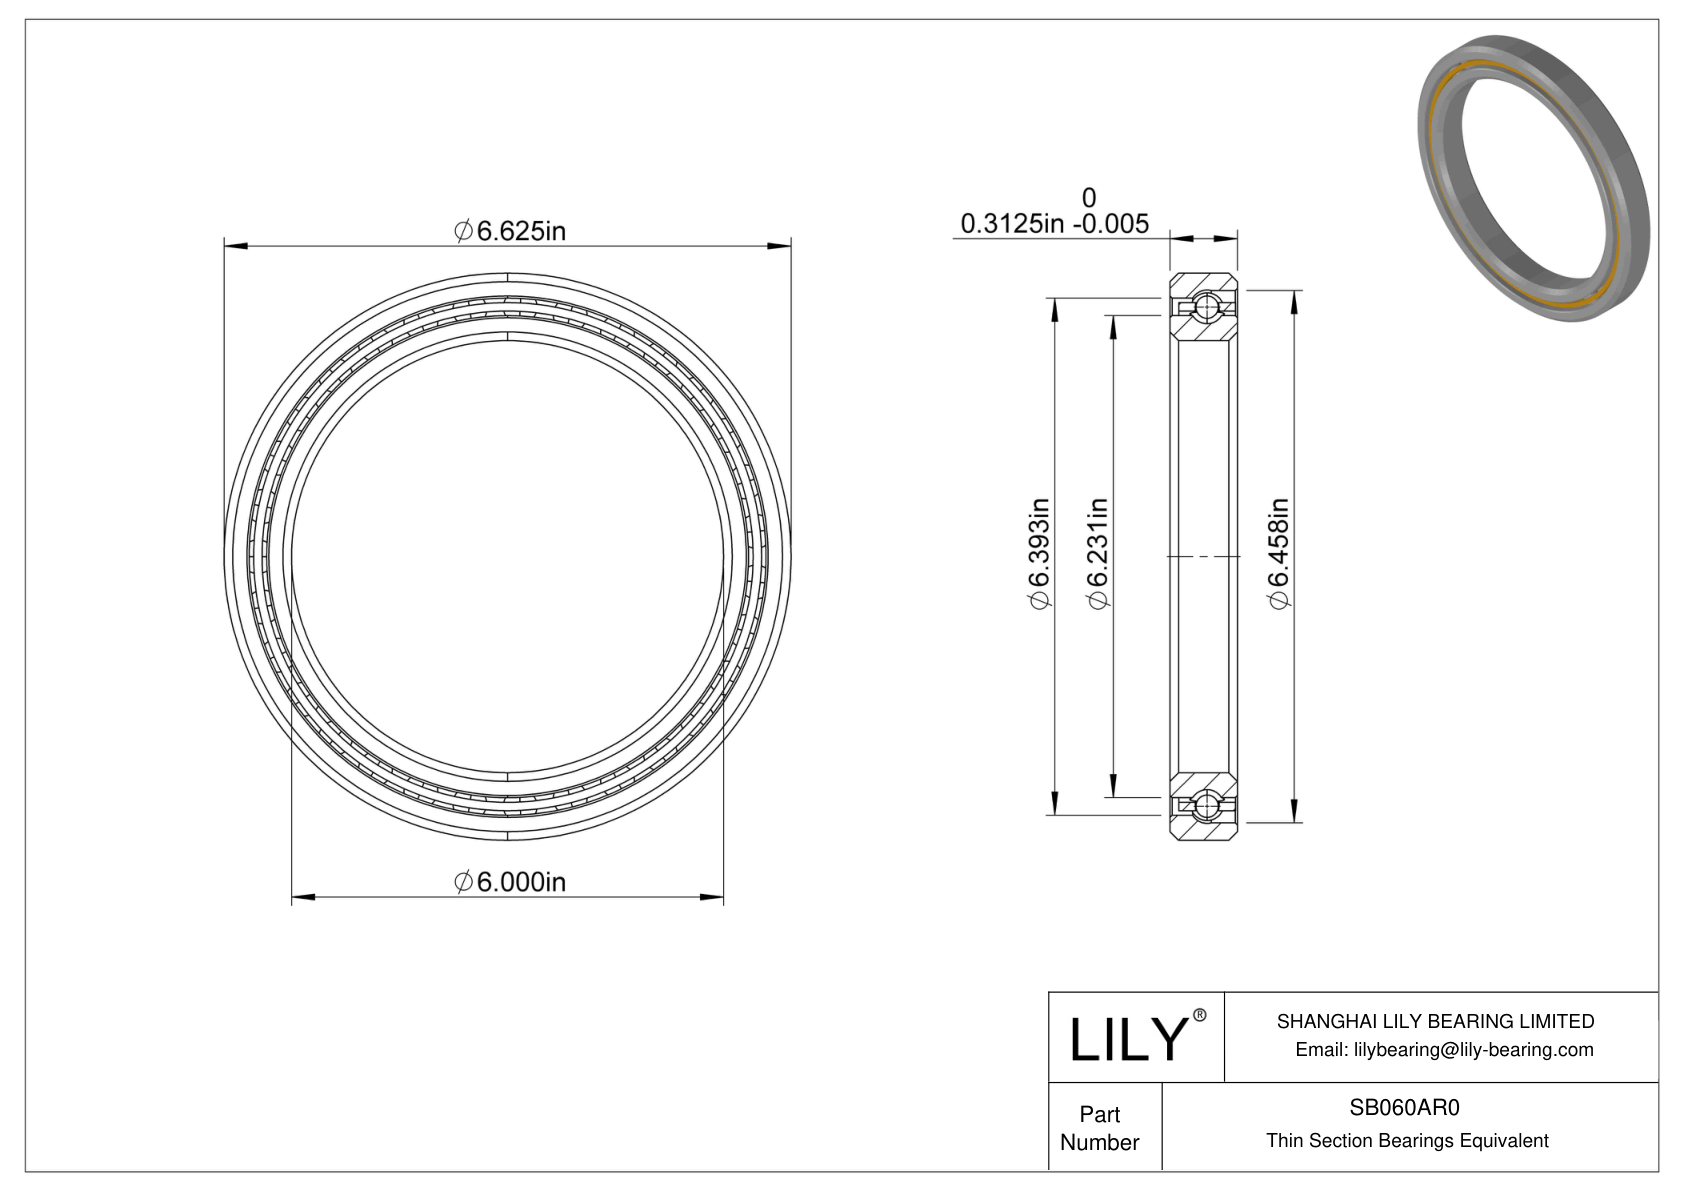 SB060AR0 Constant Section (CS) Bearings cad drawing